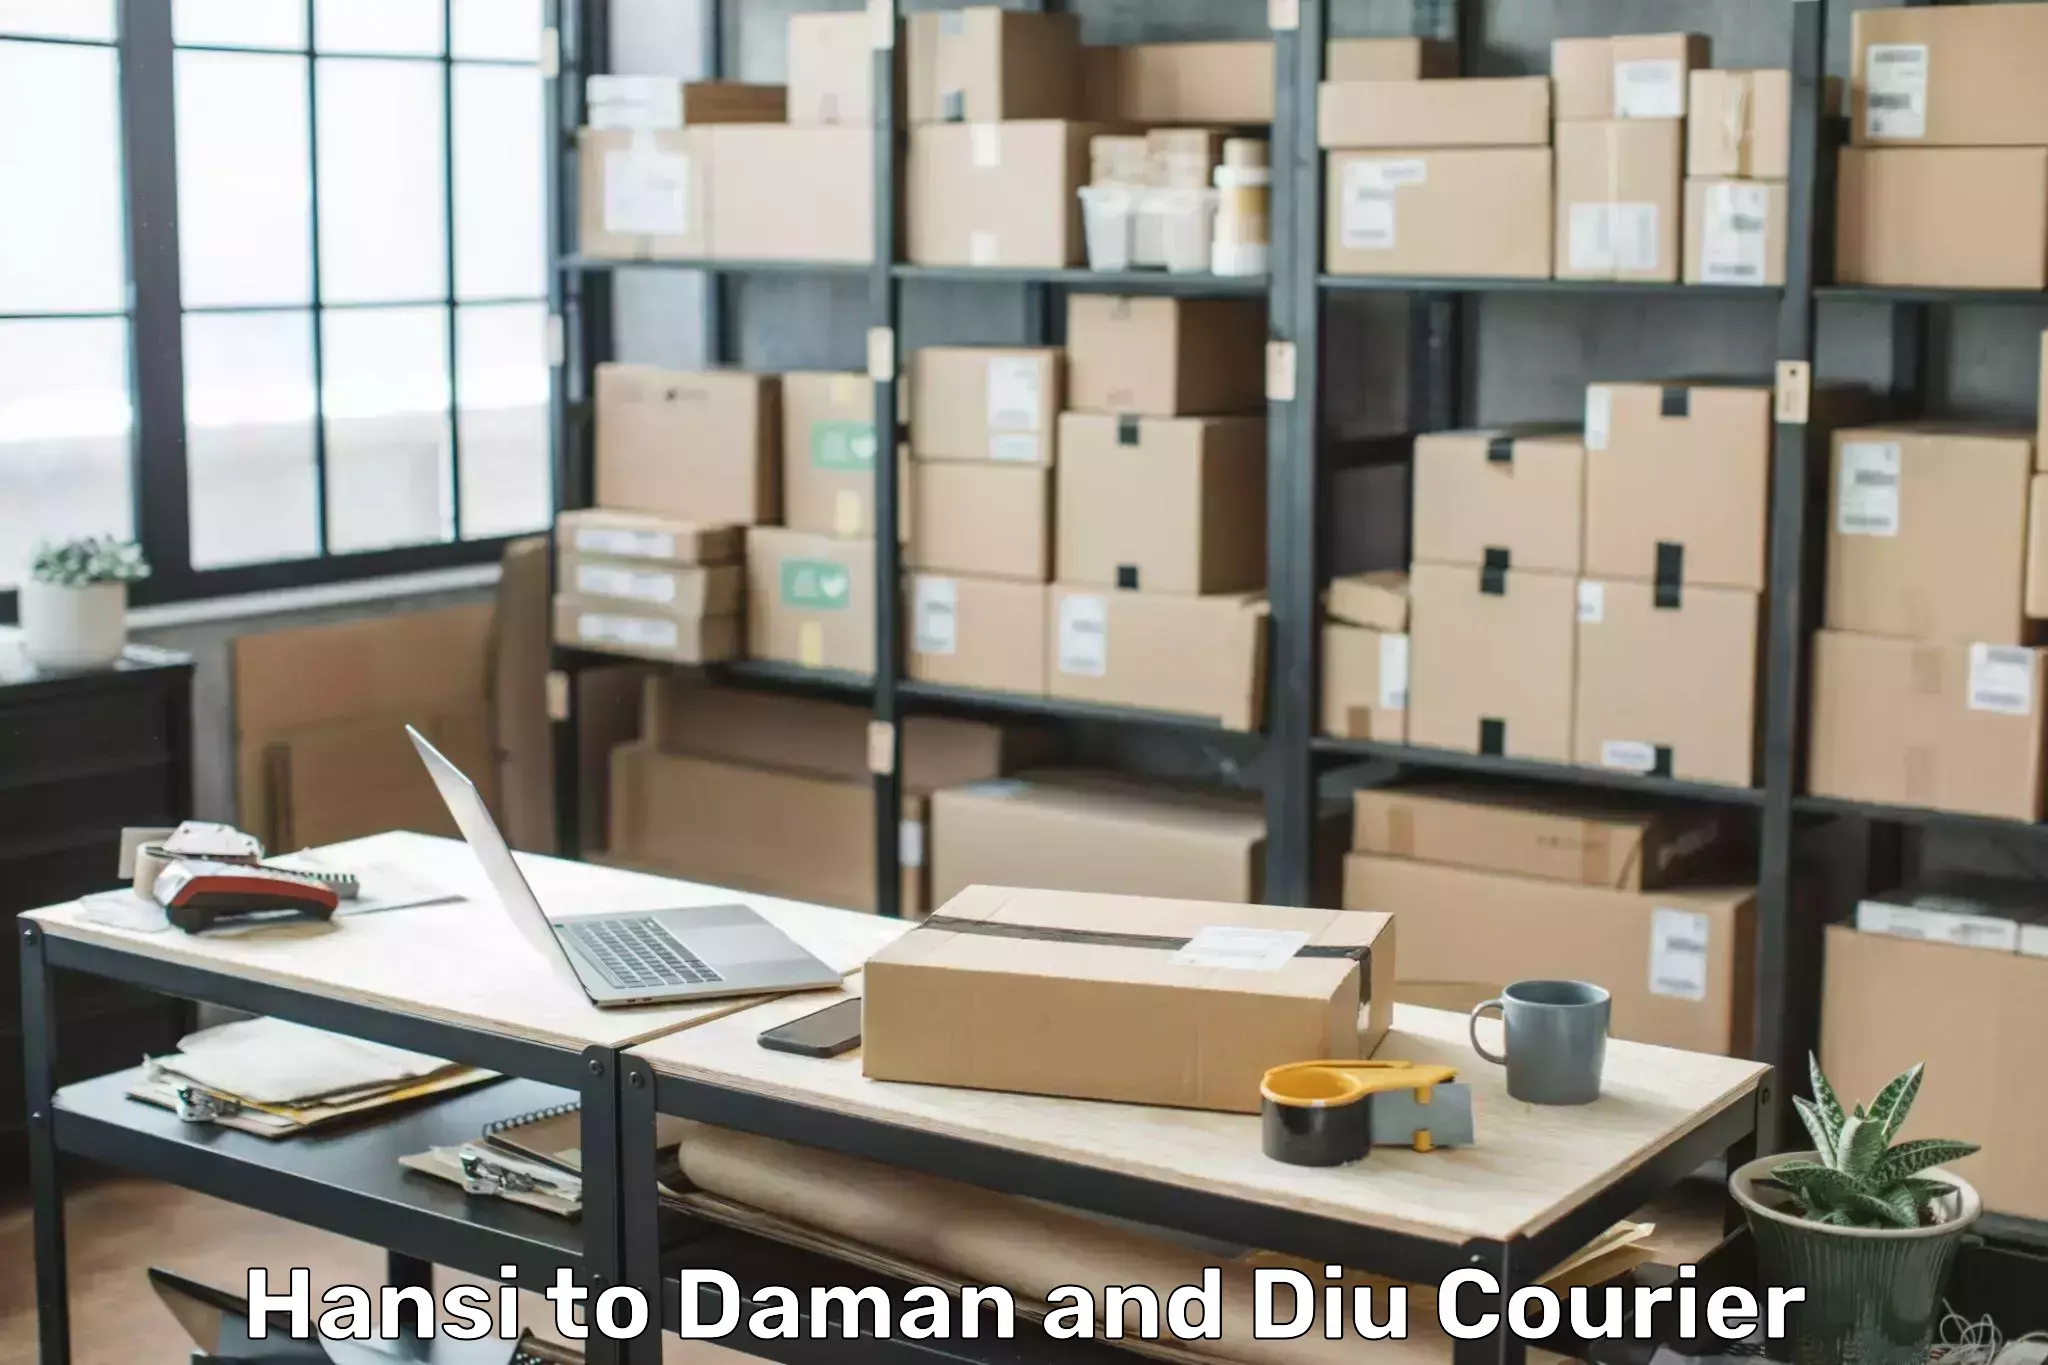 Luggage shipment specialists Hansi to Daman and Diu